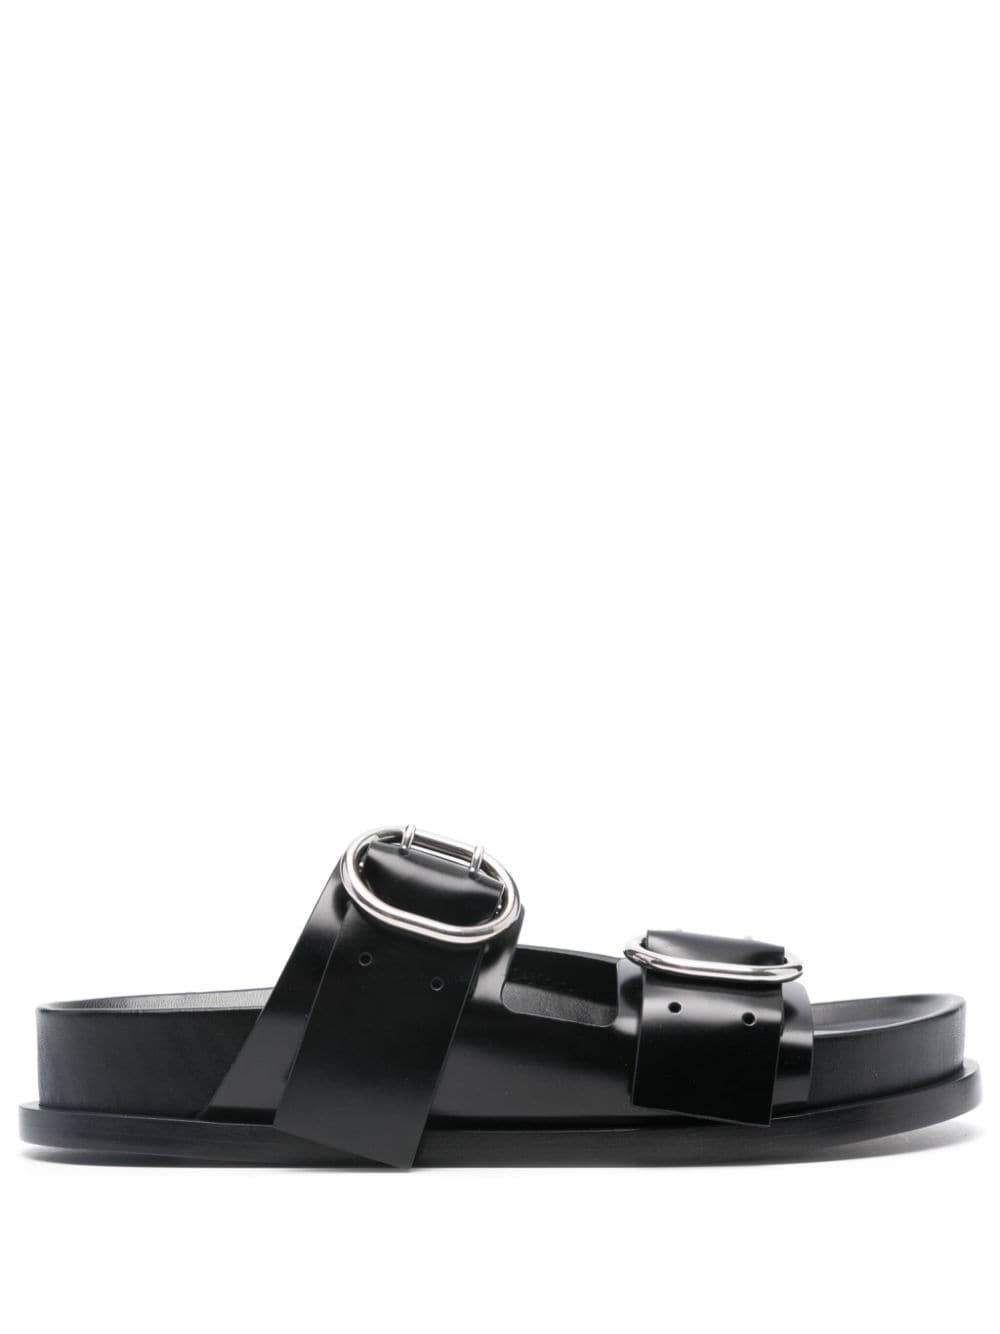 buckled leather sandals - 1